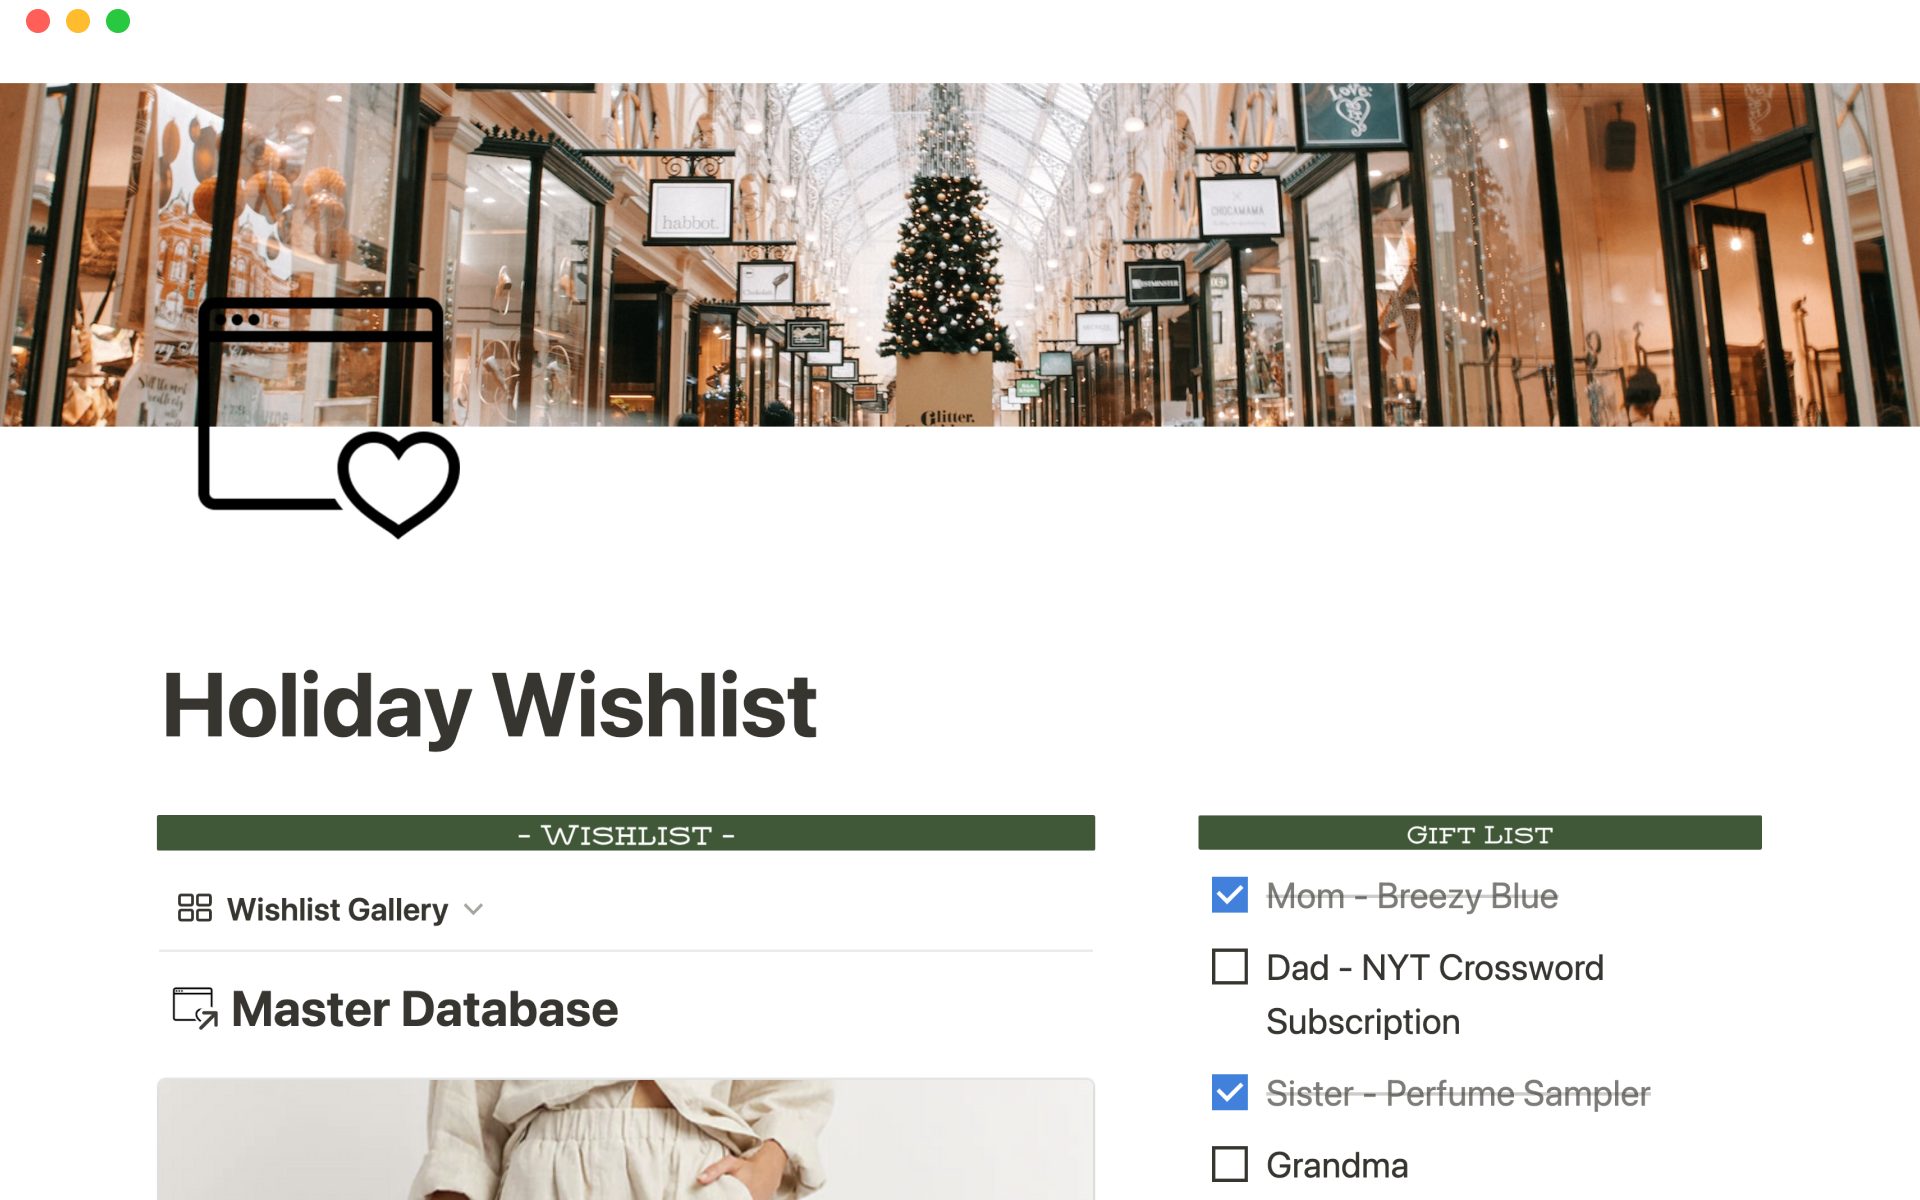 Keep track of the items on your wishlist and the gifts you will be buying for others.